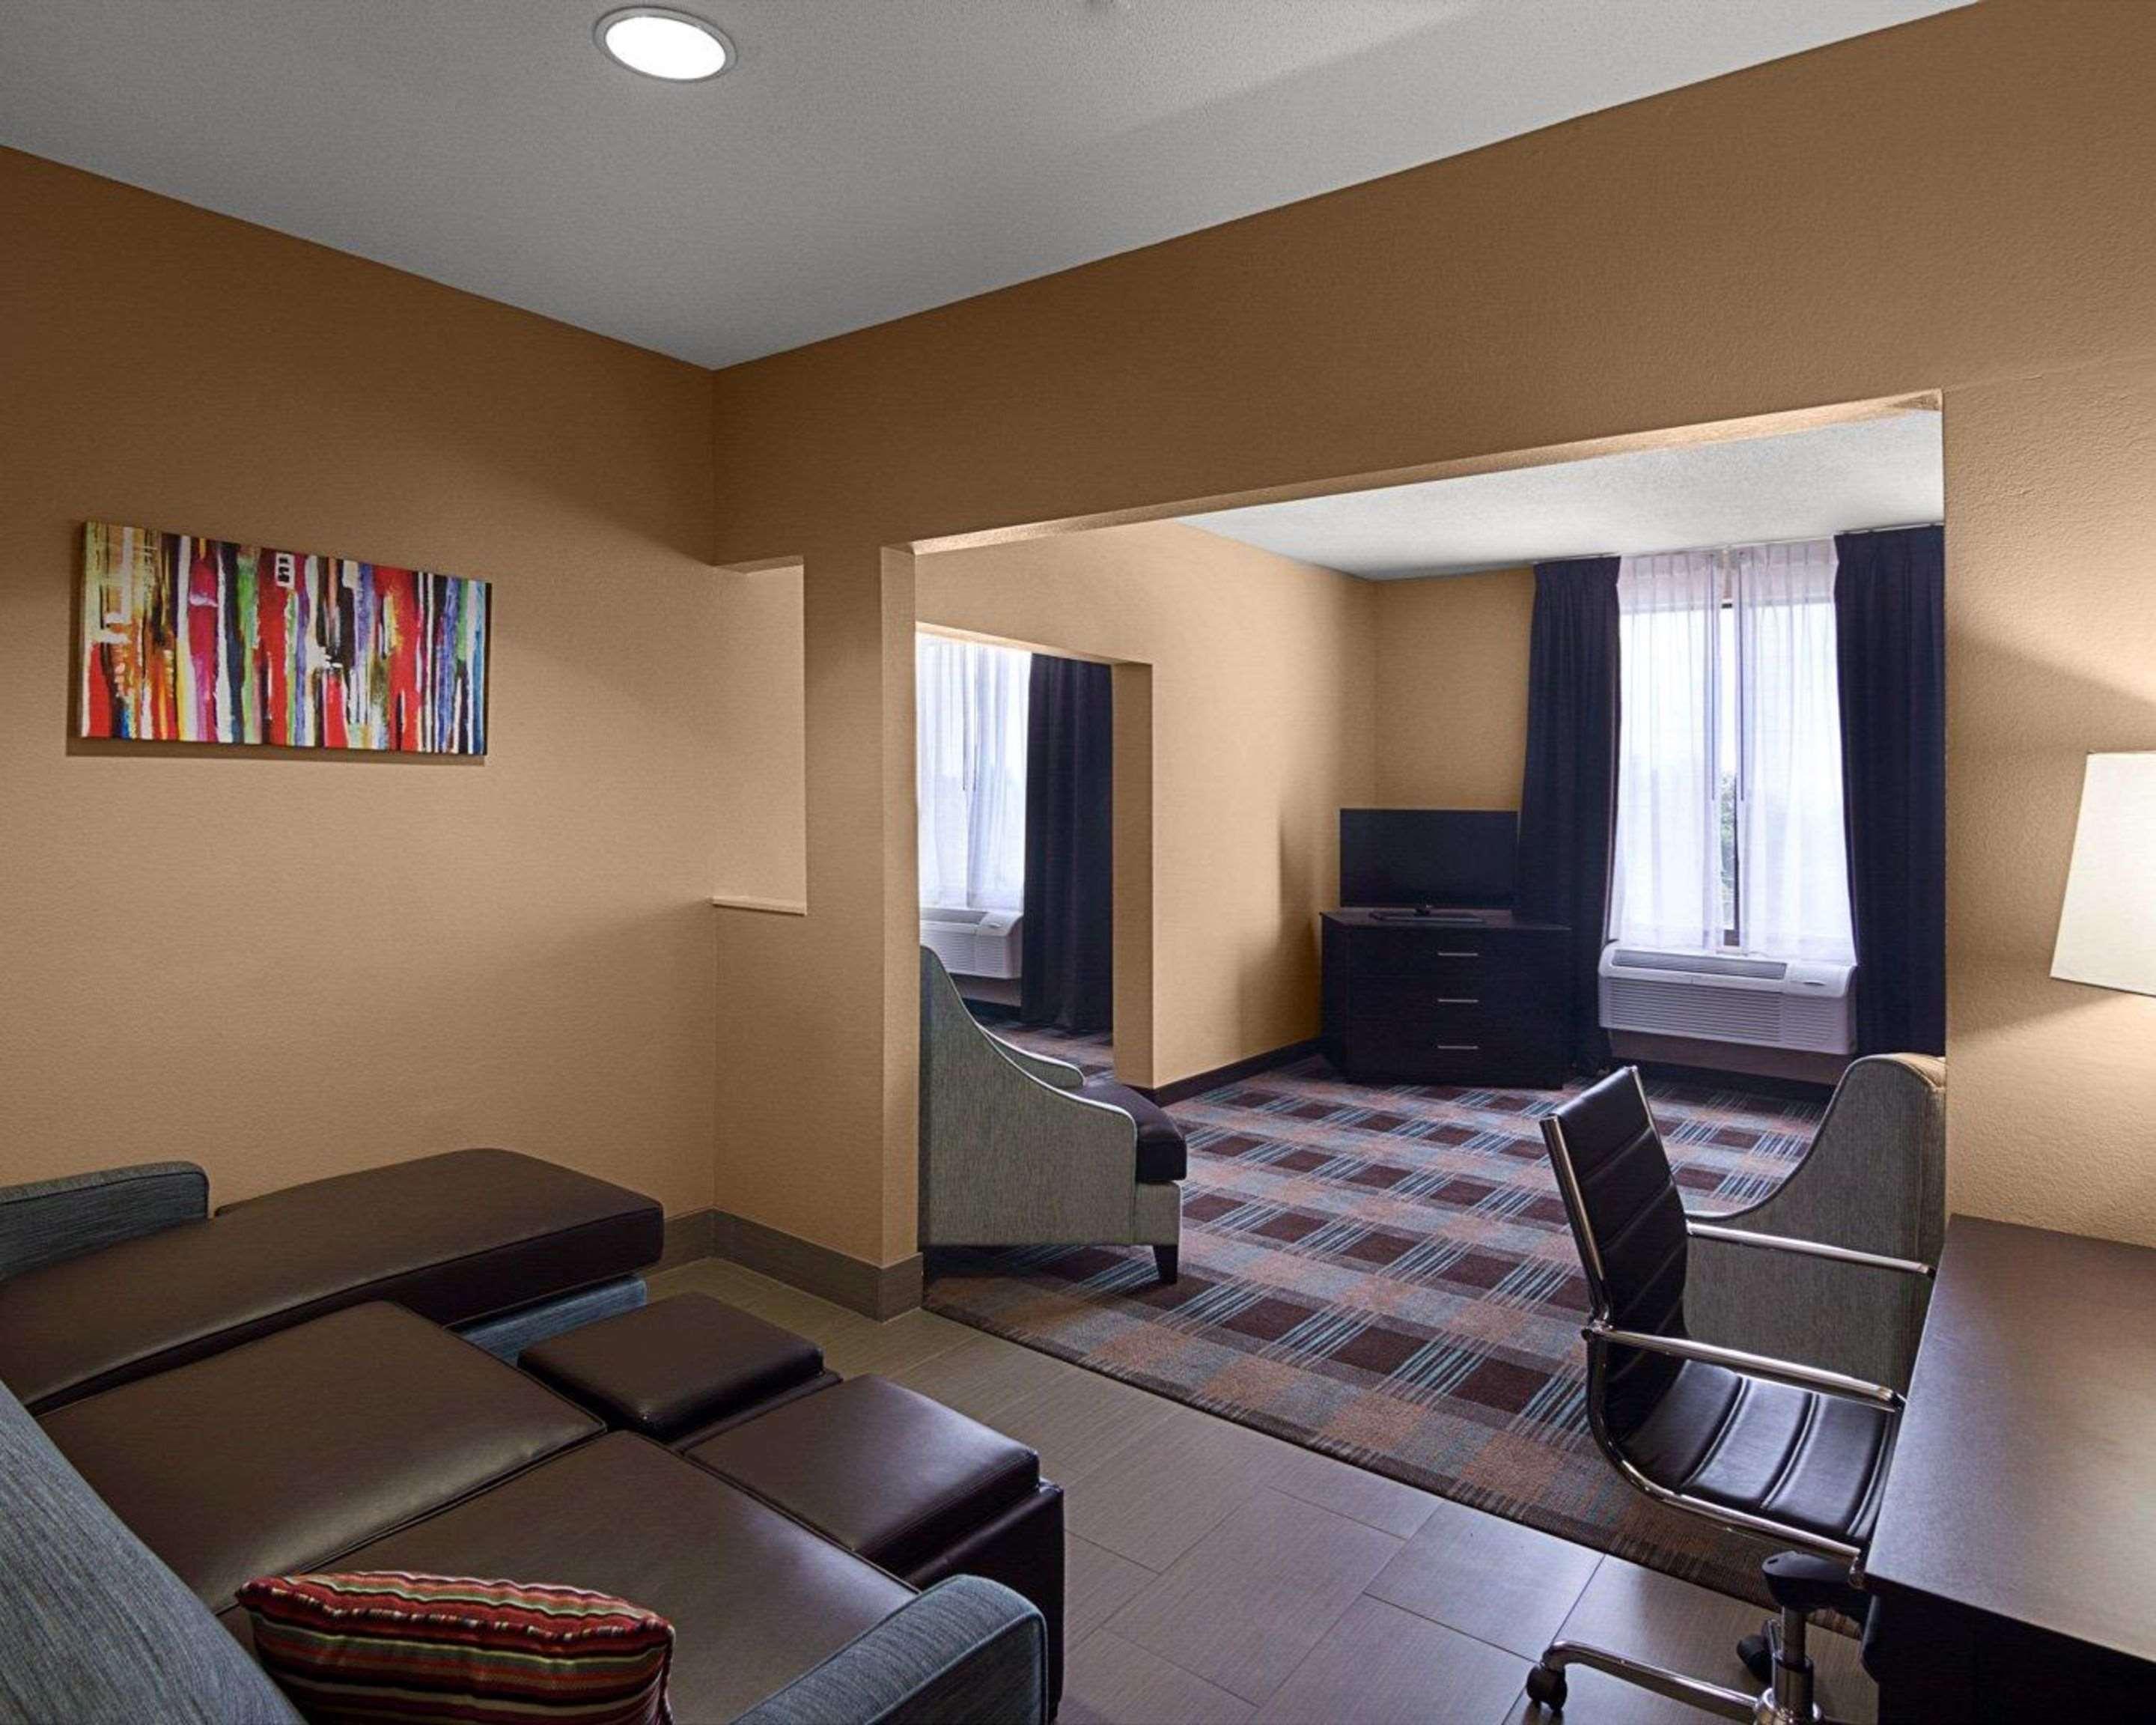 Comfort Suites Houston West at Clay Road